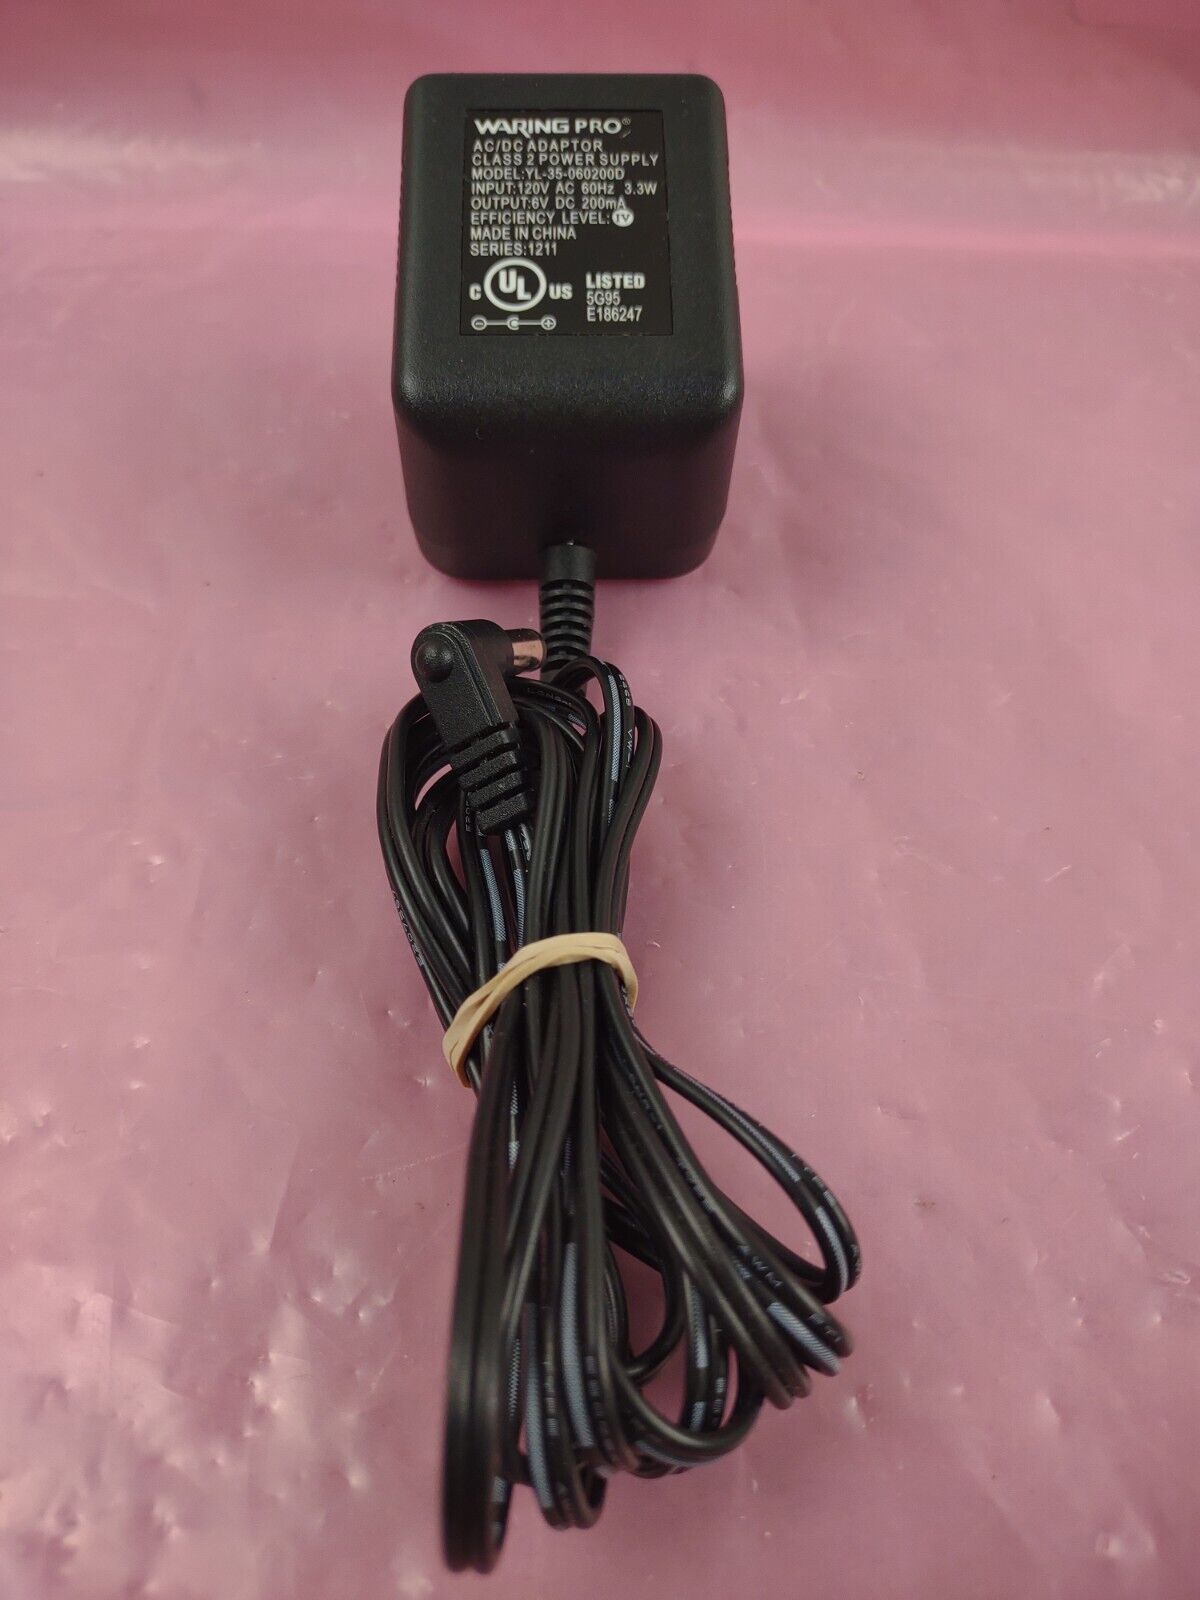 Waring Pro Power Supply Adapter Model: YL-35-060200D Output: 6V DC 200mA Type: AC/DC Adapter Output Voltage: 6 V B